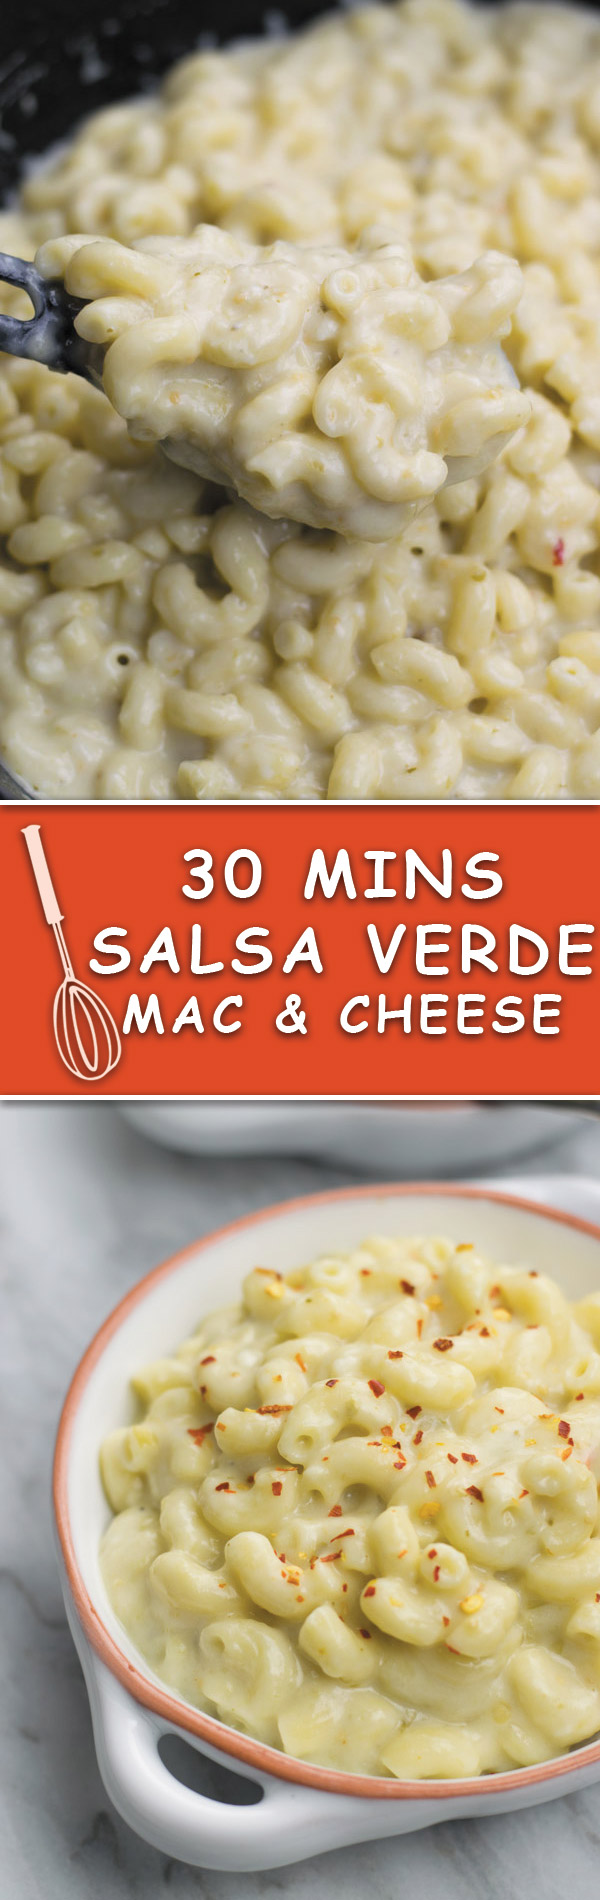 30 mins salsa verde mac and cheese - delicious (LIGHTENED UP) (NO CREAM) stovetop mac and cheese made extra flavorful with salsa verde! A perfect holiday meal for those busy nights!